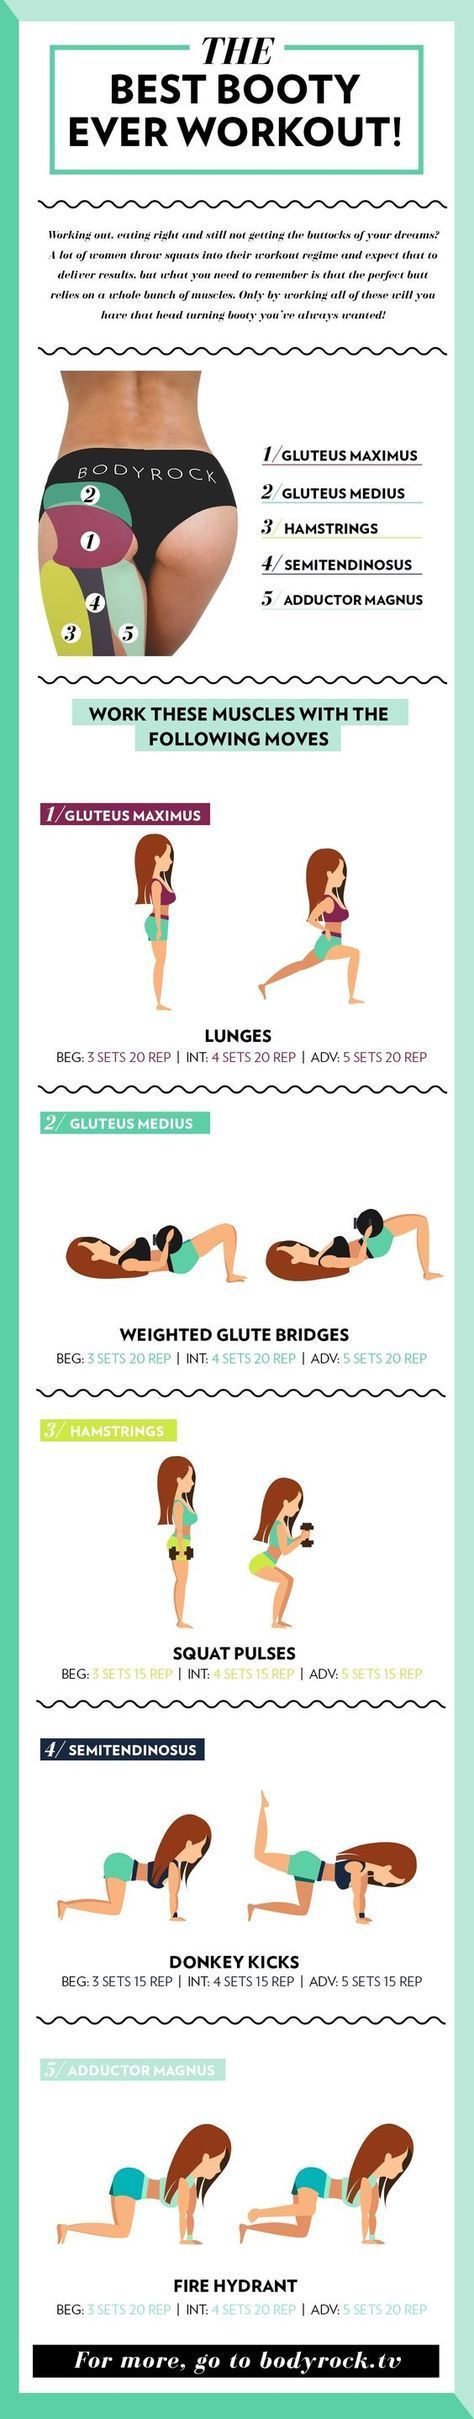 The link is confusing, but the image looks good for a glute and back leg workout !